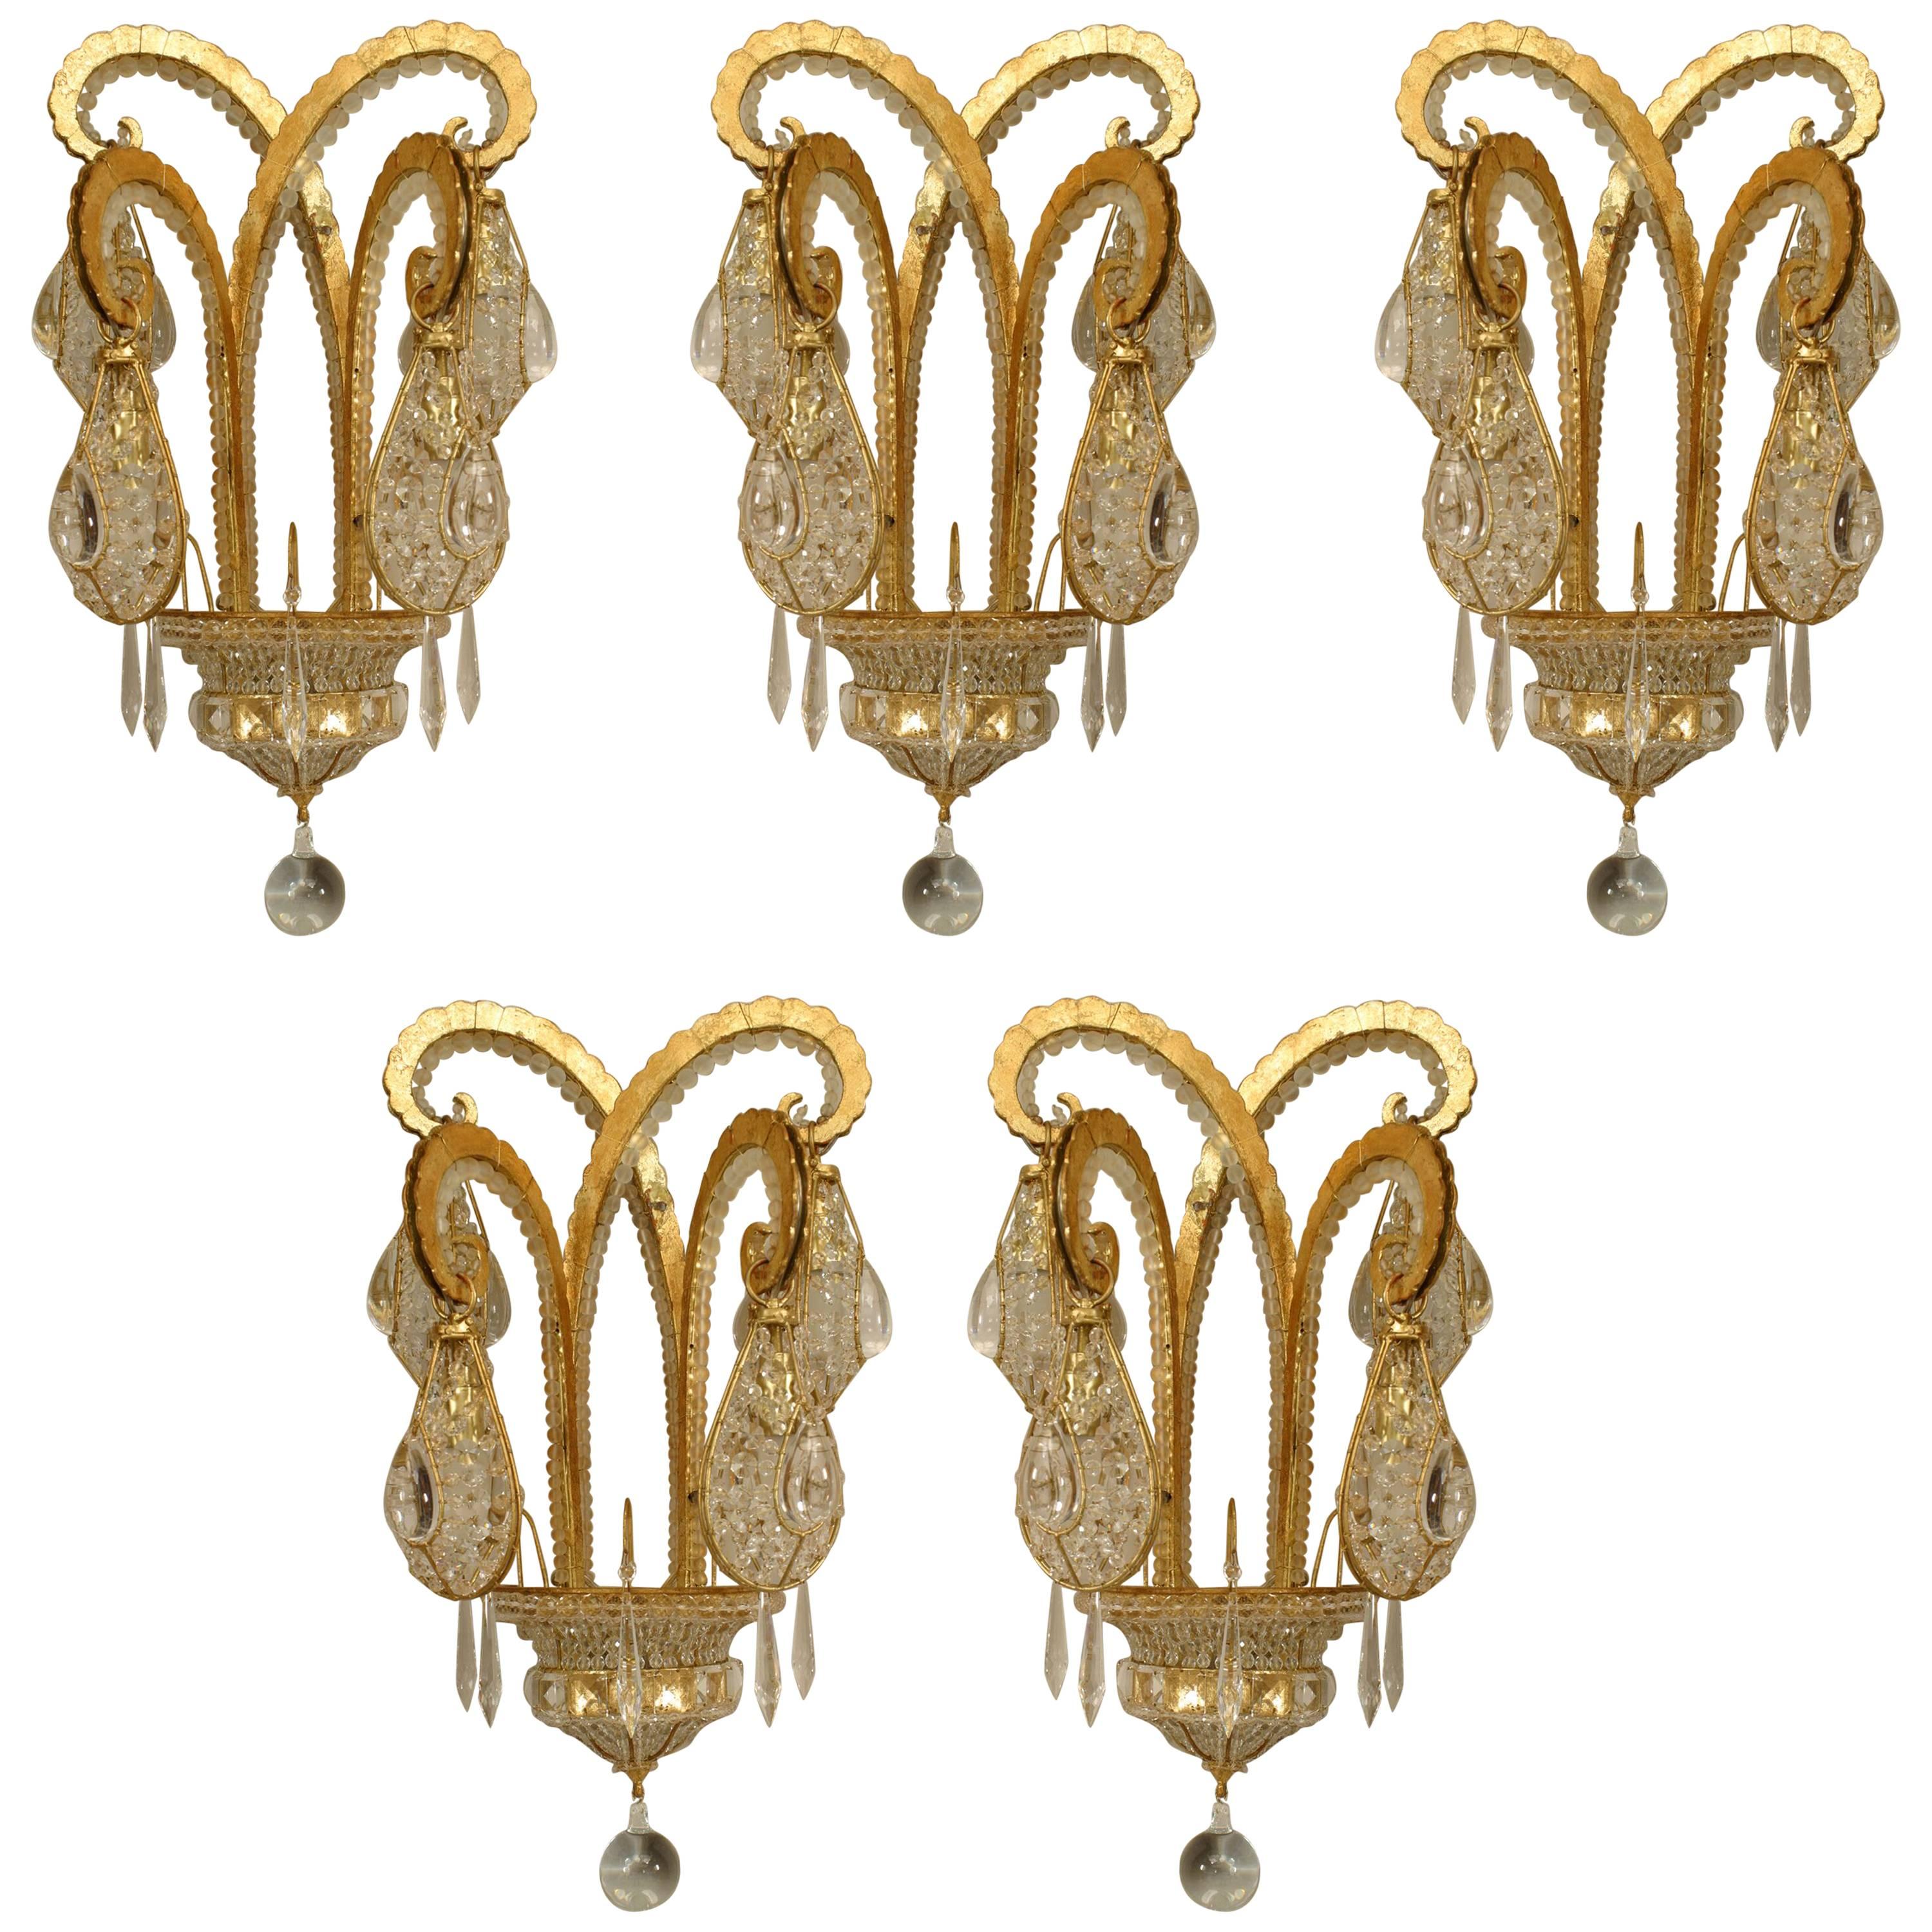 5 Art Deco Gilt Metal & Glass Octopus Wall Sconces in Maison Bagues Manner For Sale